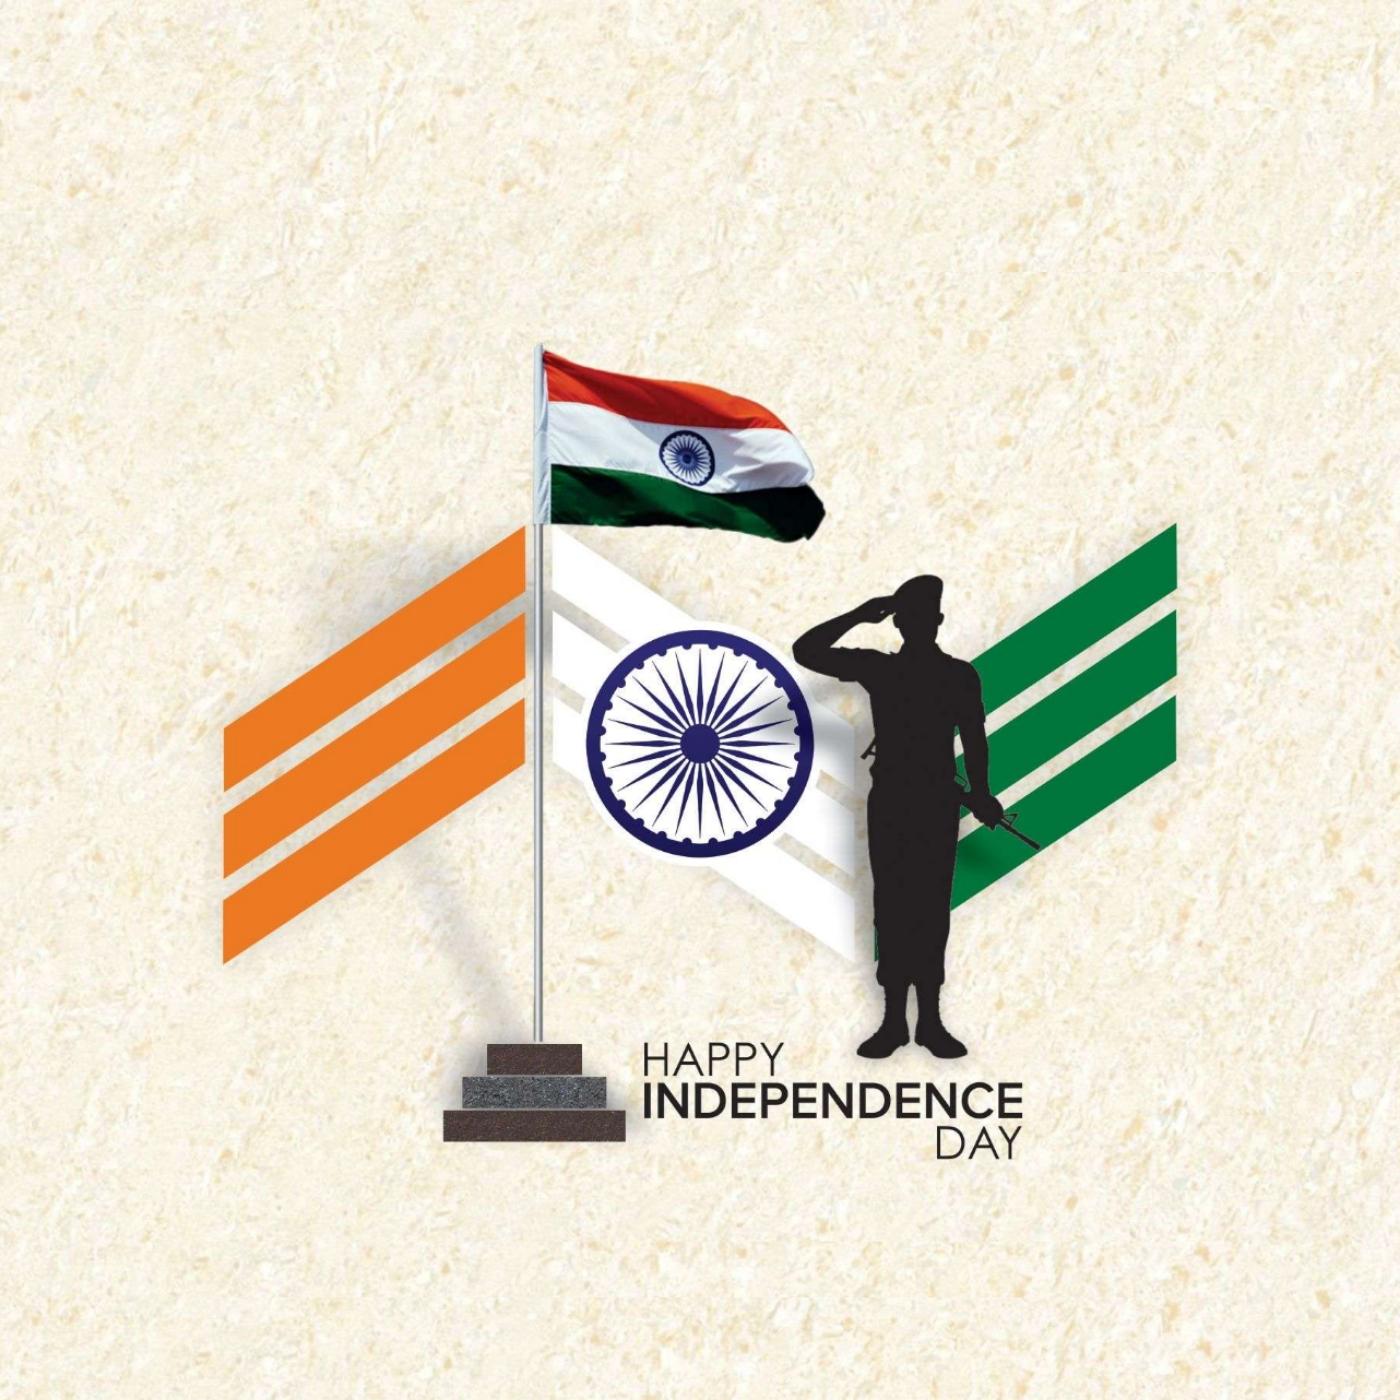 Happy Independence Day Photo 2022